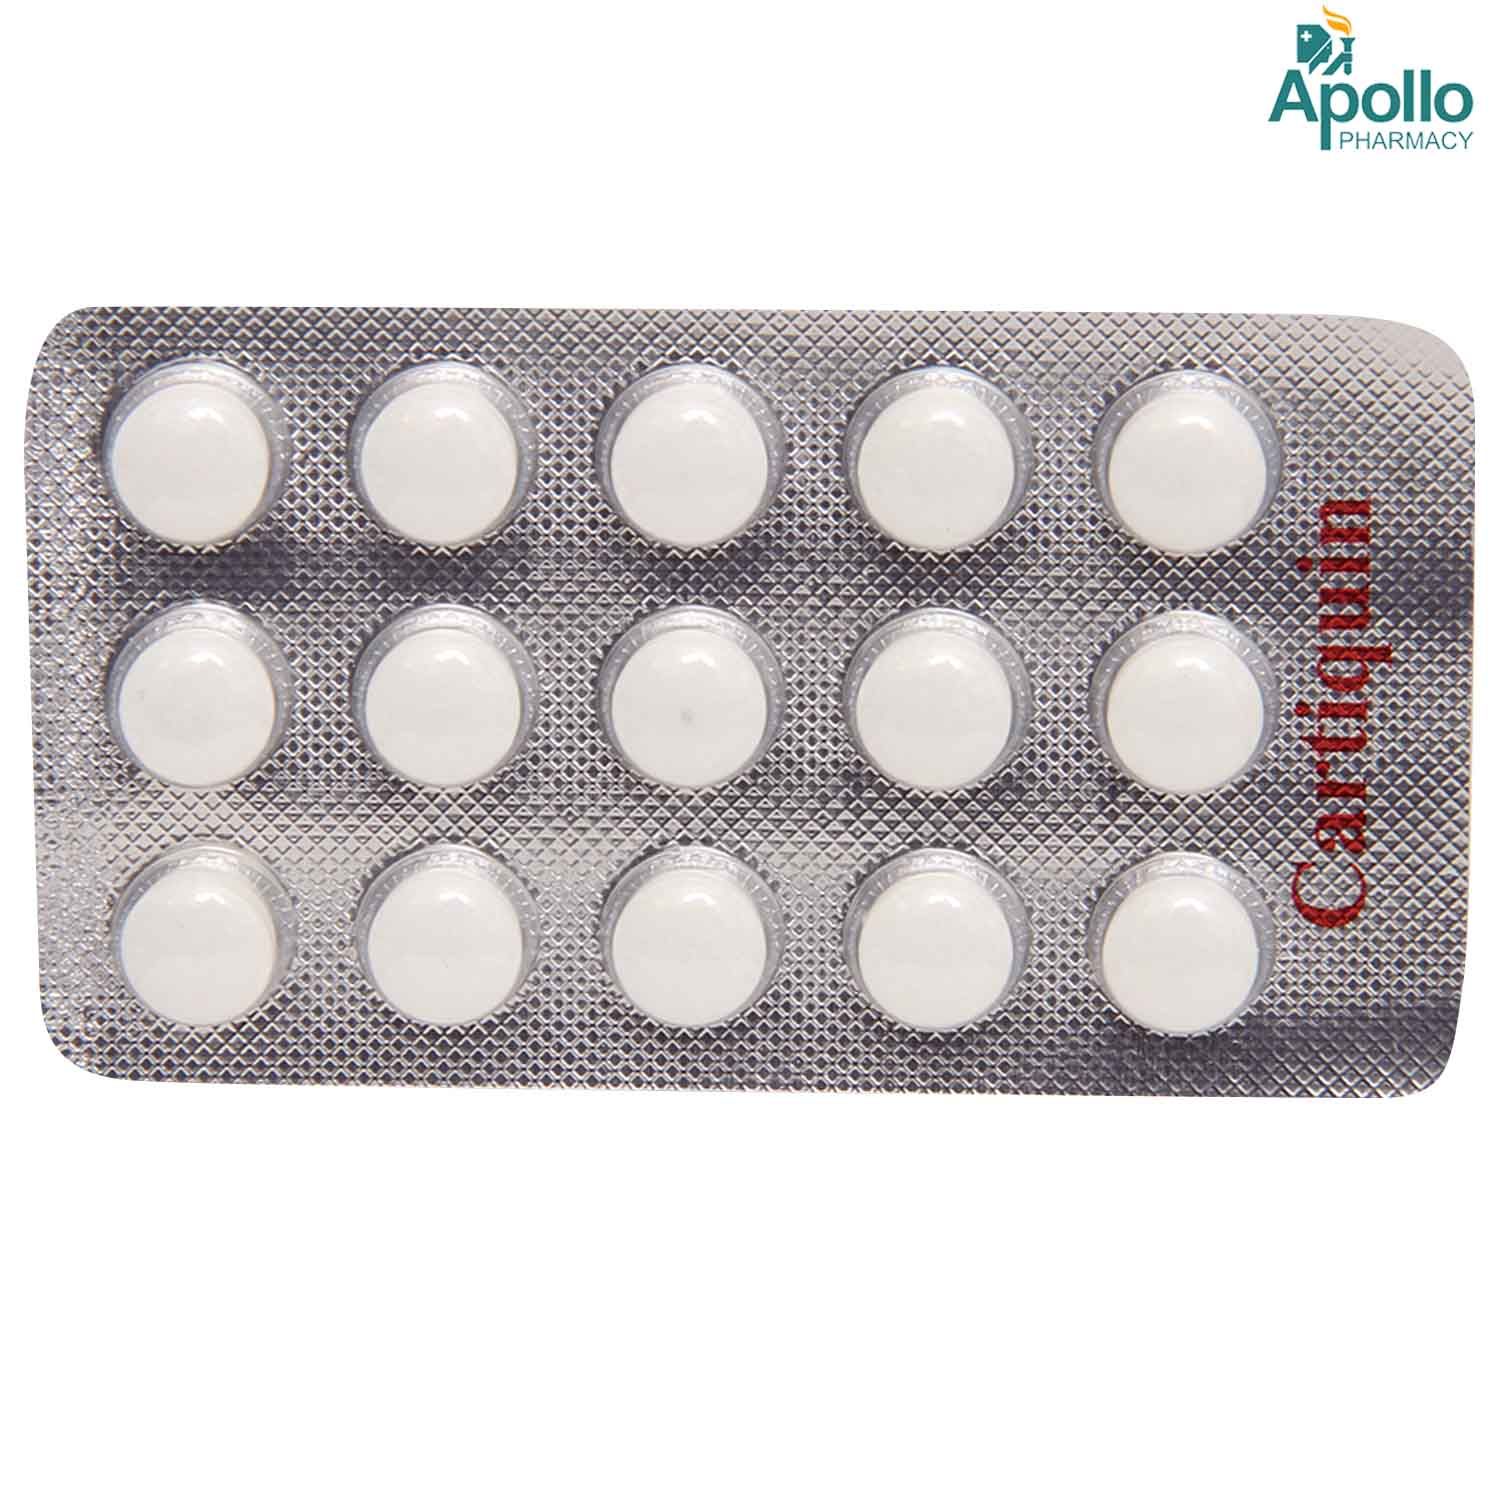 Cartiquin 200mg Tablet 15's, Pack of 15 TABLETS